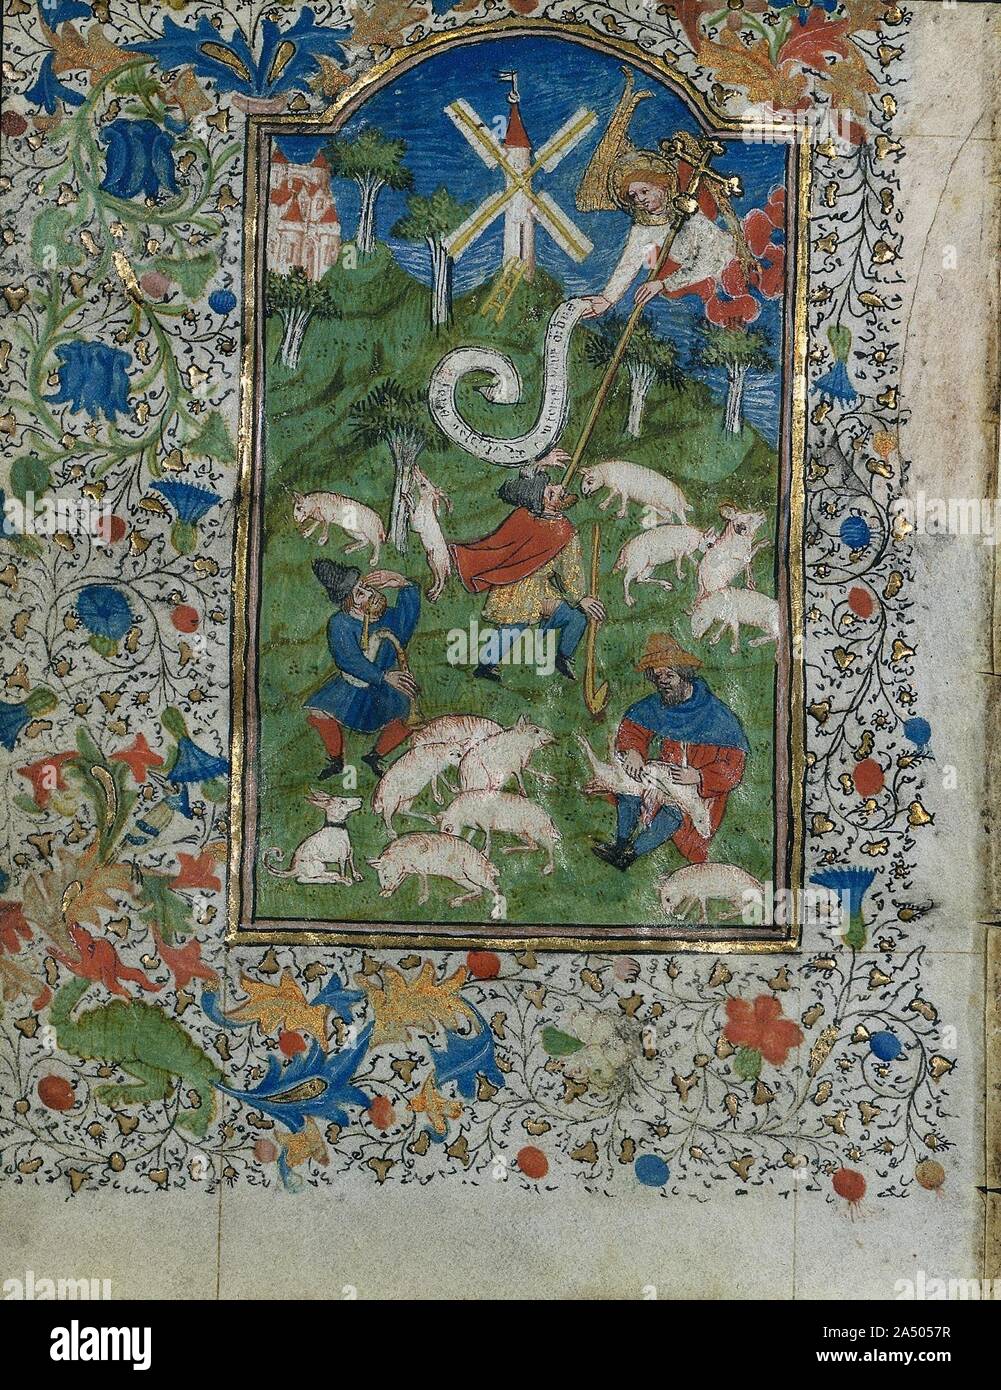 Annunciation to the Shepherds: Leaf from a Book of Hours (1 of 6 Excised Leaves), c. 1420-1430. This group of leaves survive from what must have been an extraordinarily rich book of hours. The elaborate Passion cycle and Suffrages point to an important patron. Internal evidence within the original calendar and texts indicates that Metz was the probable place of production. Stylistically, the illuminations appear to come from the workshop of Henri d&#x2019;Orquevaulx, a documented Metz manuscript painter. Little is known about d&#x2019;Orquevaulx&#x2019;s life or career. Compositionally, struct Stock Photo